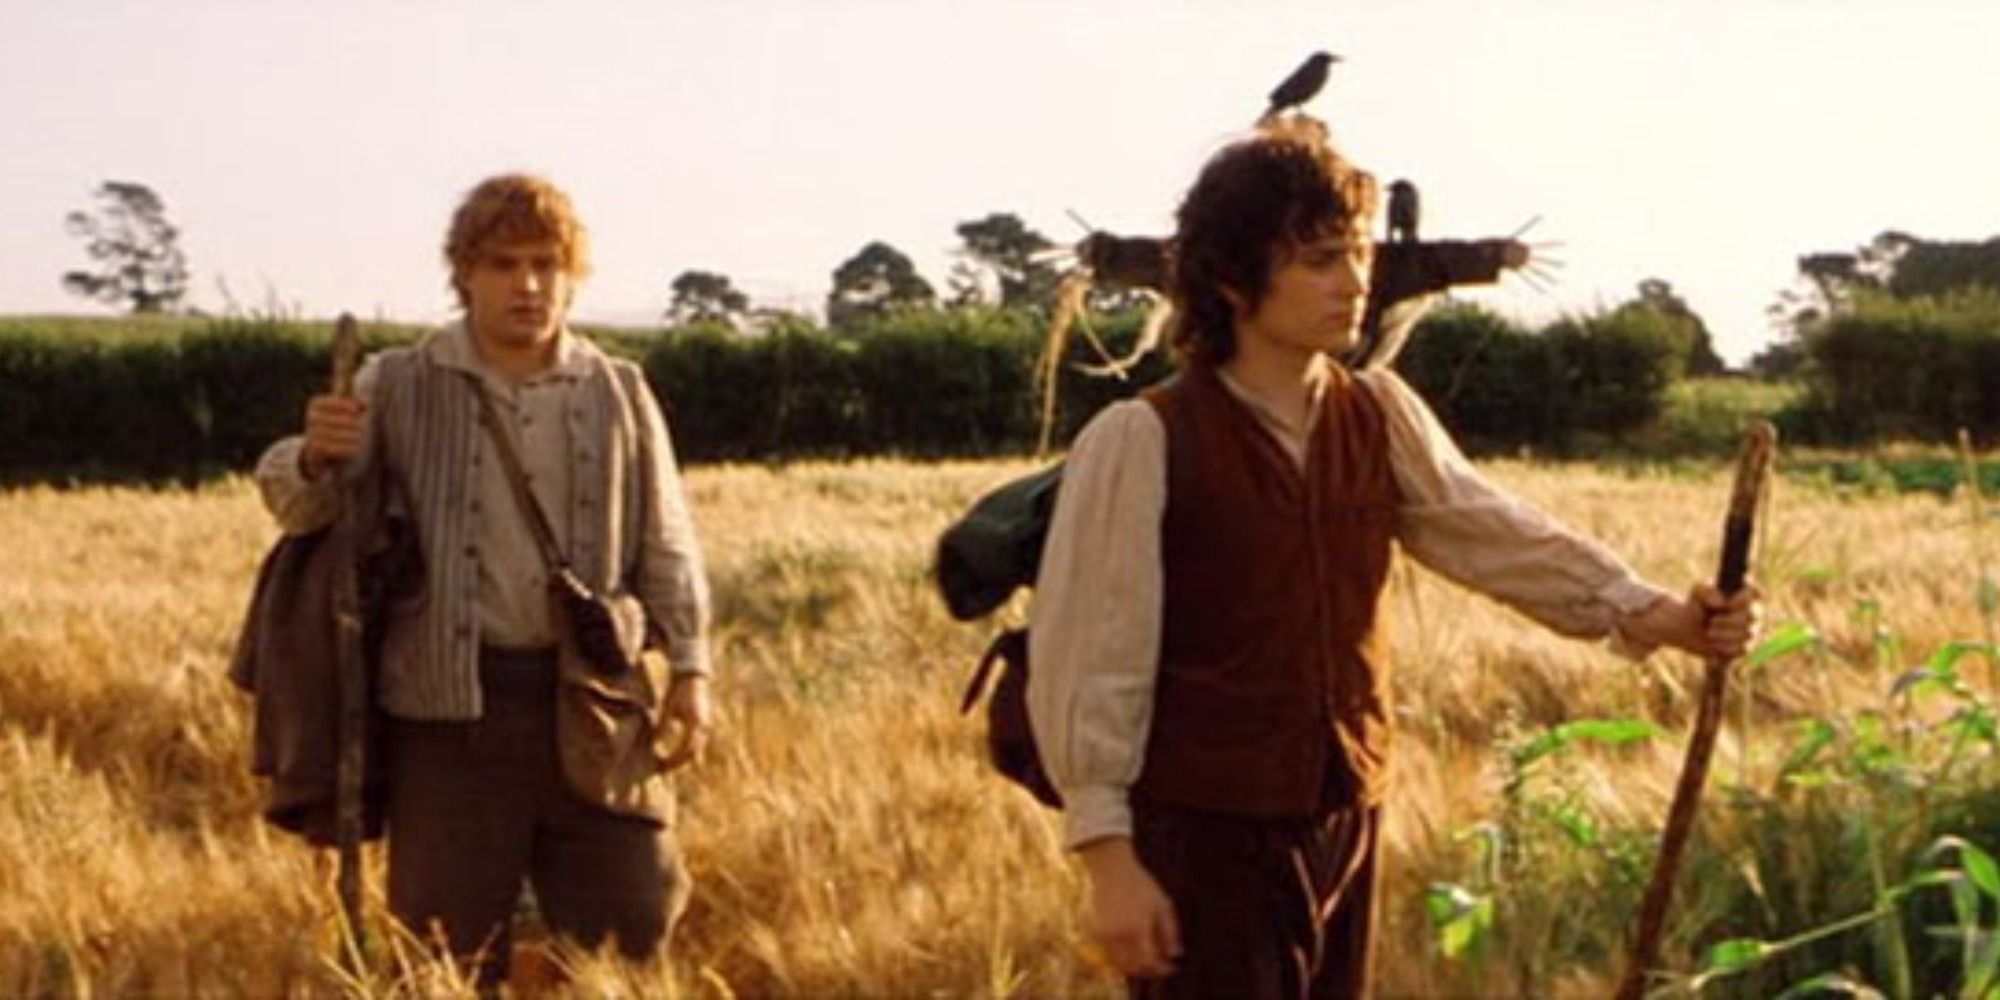 Frodo and Sam walking in The Lord of the Rings The Fellowship of the Ring